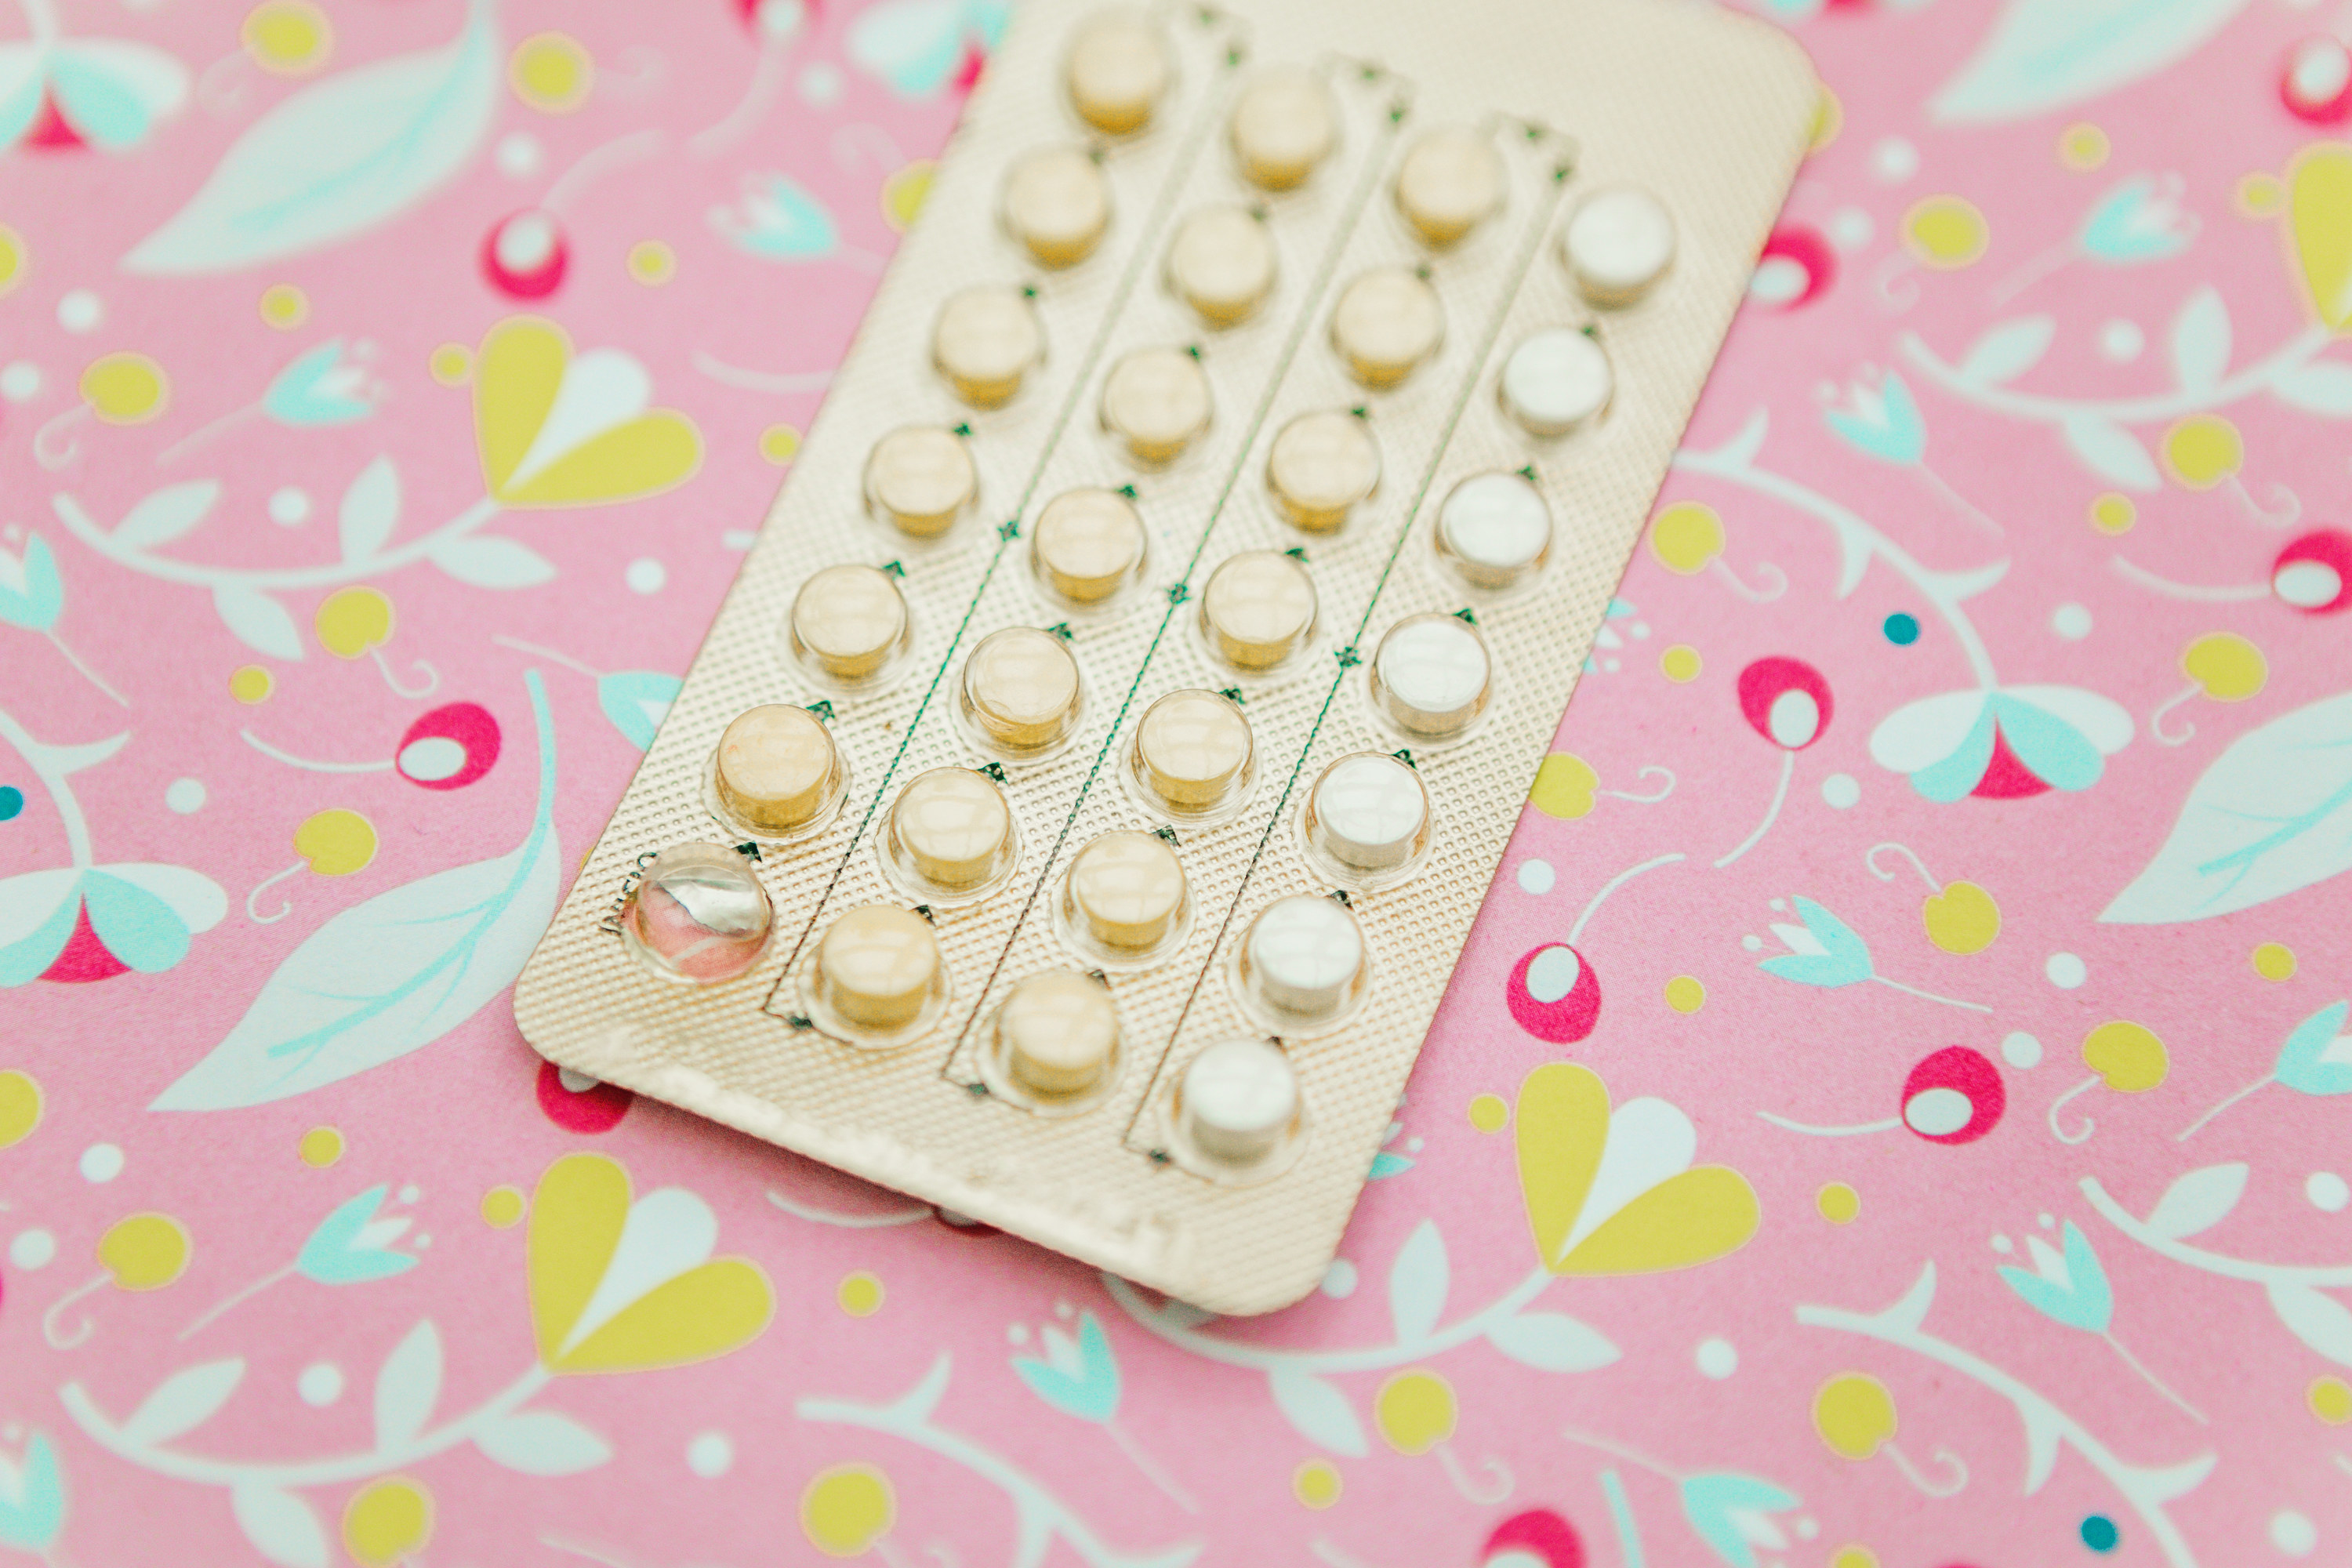 A stock image of a pack of birth control pills, on a colorful pink flowery background